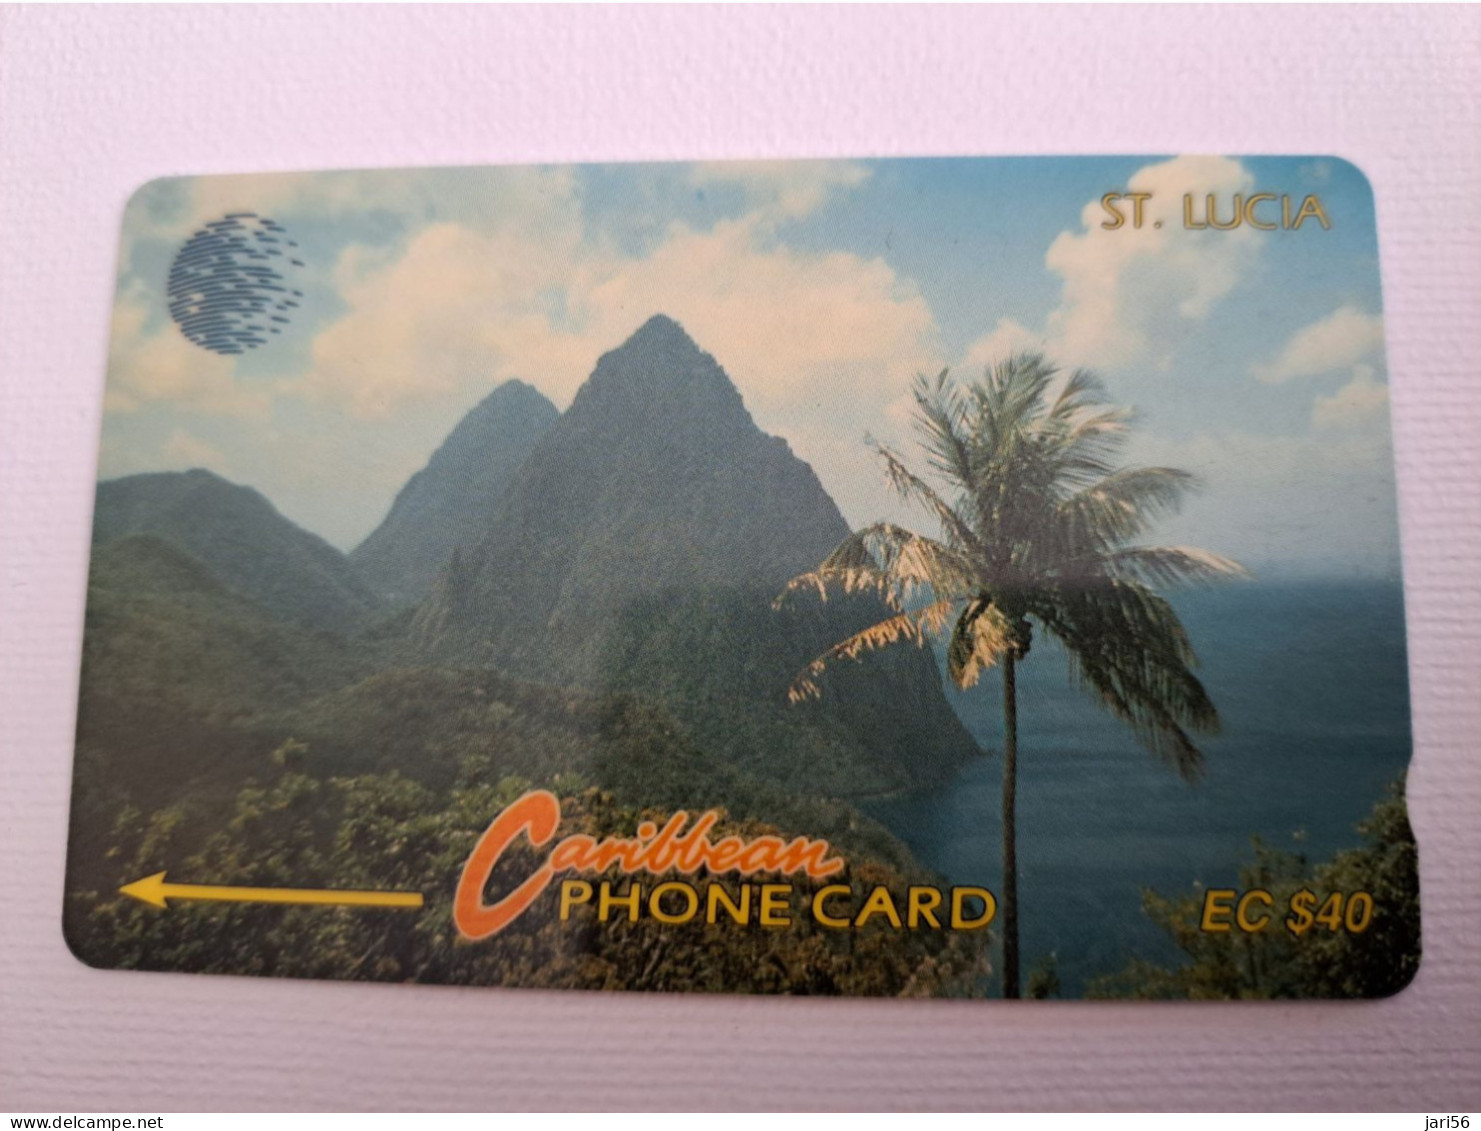 ST LUCIA    $ 40  CABLE & WIRELESS  STL-14C  14CSLC      Fine Used Card ** 13522** - St. Lucia